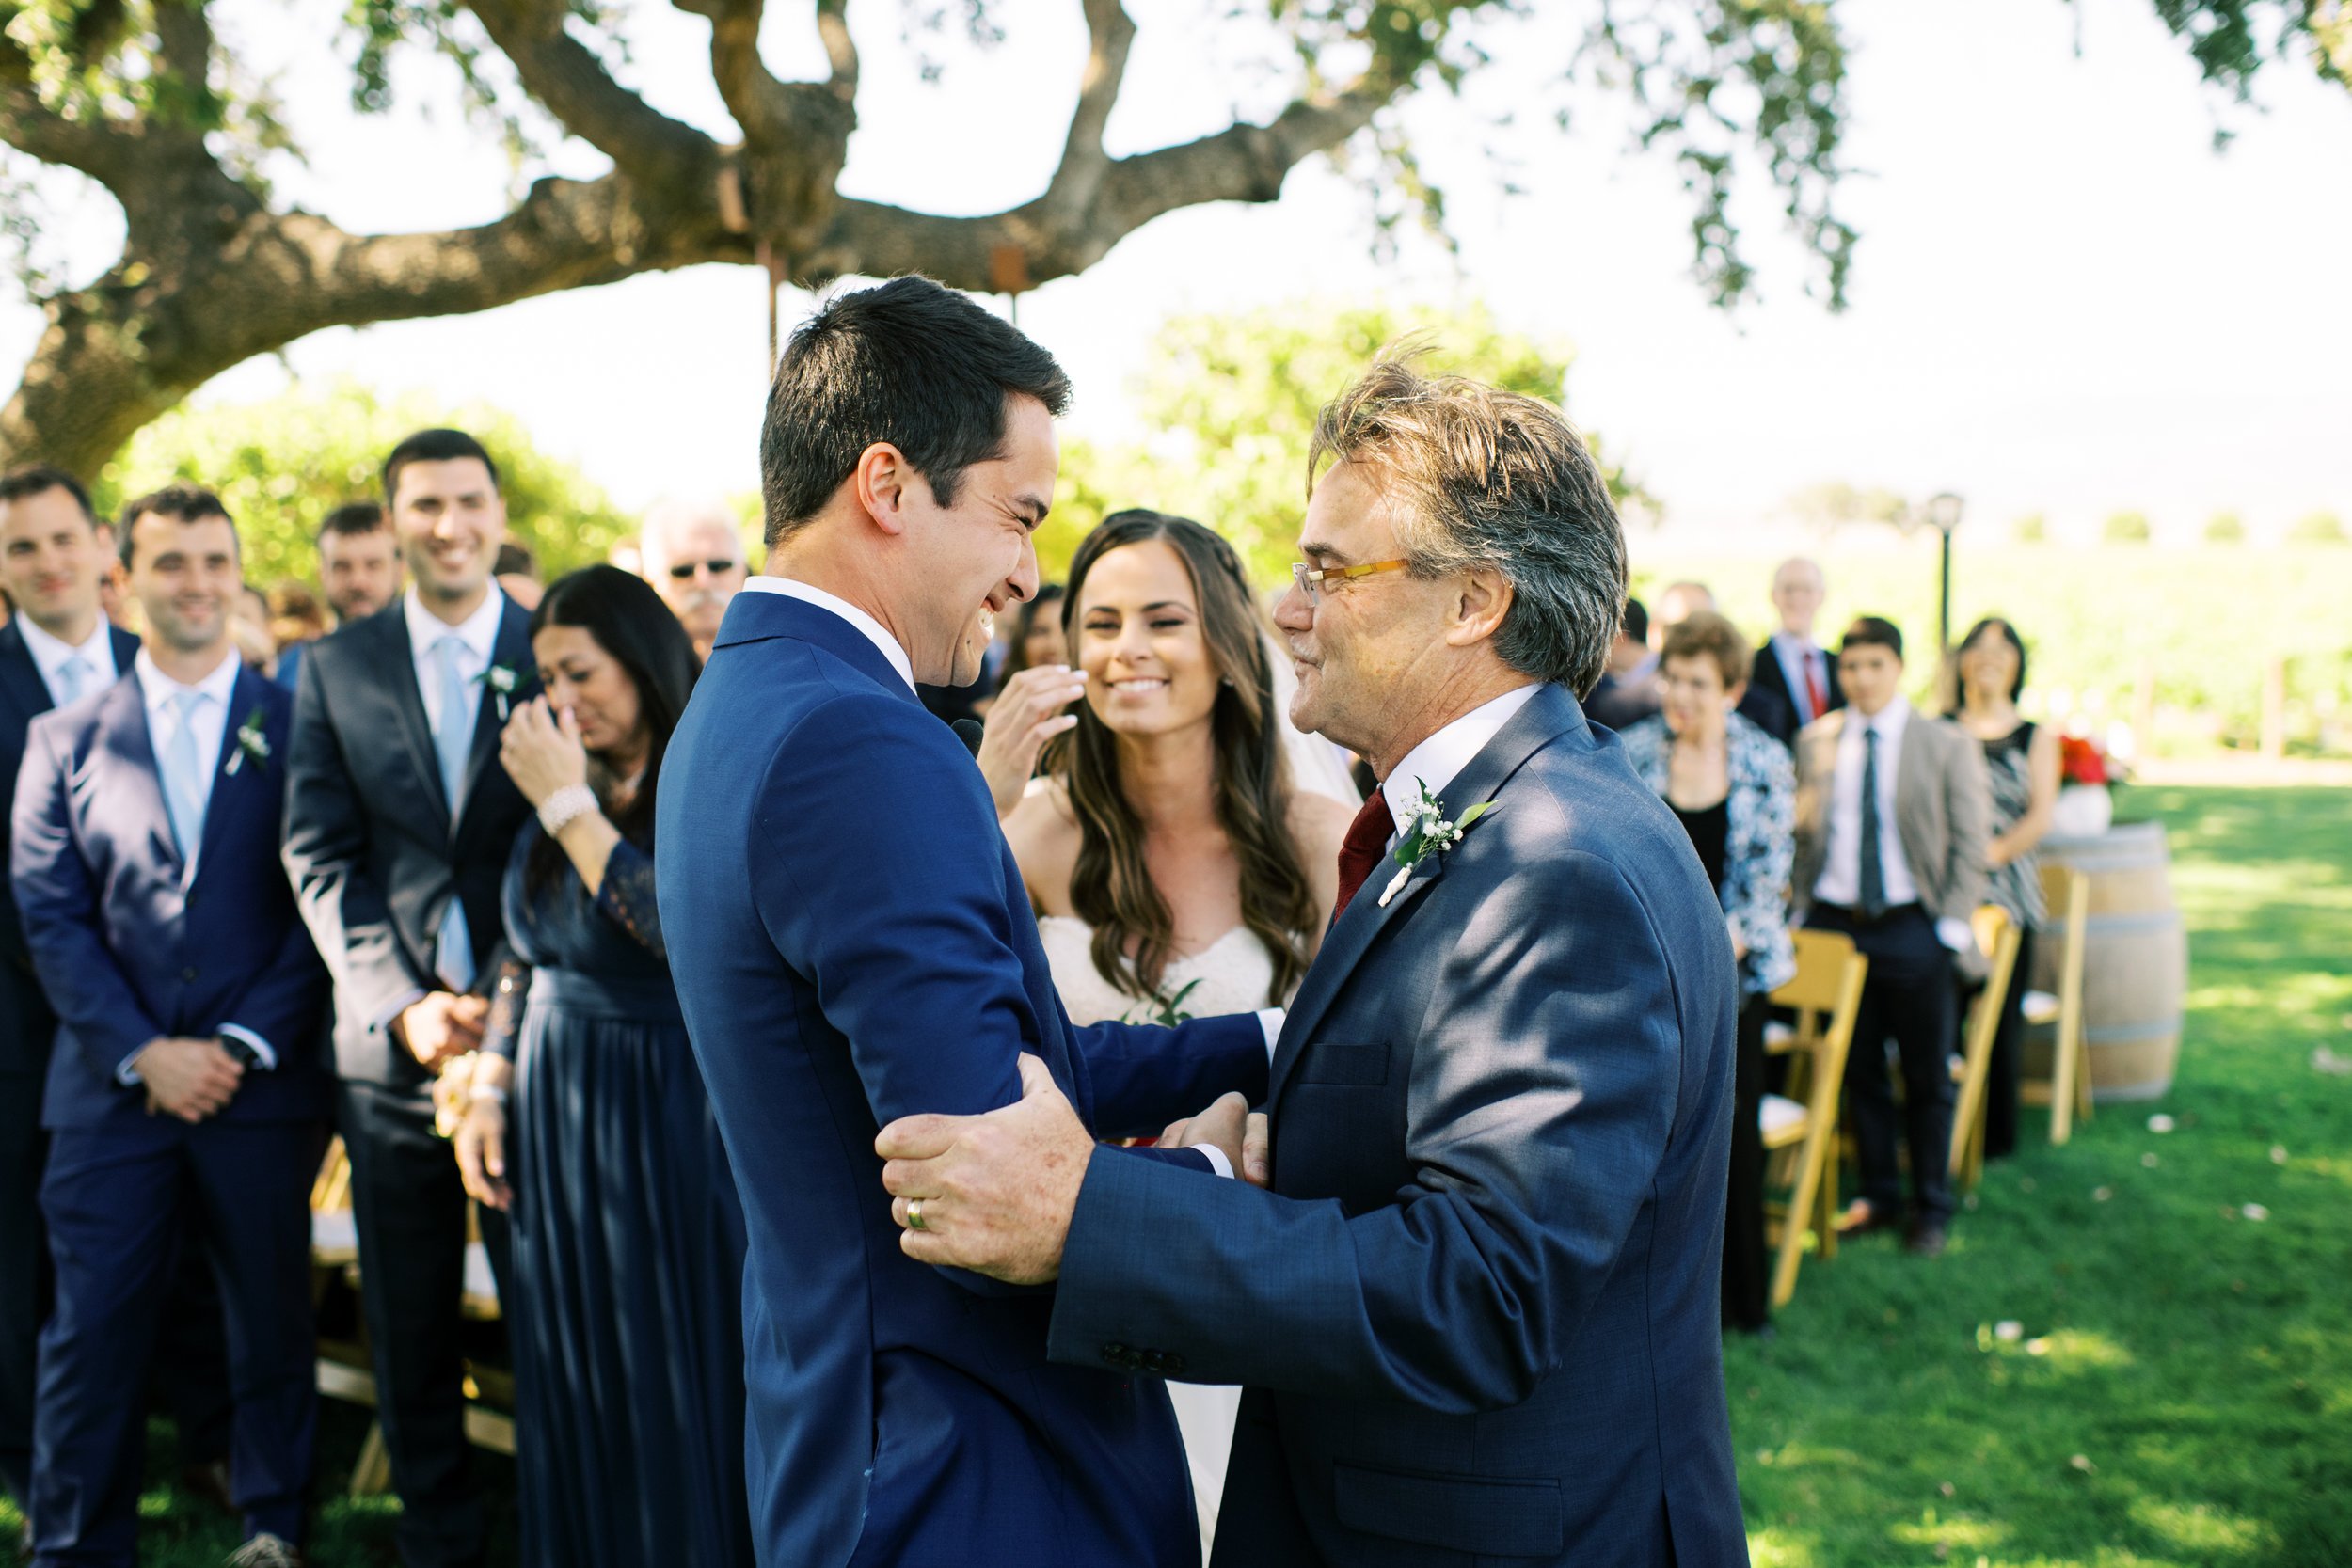 www.santabarbarawedding.com | Loveridge Photography | Gainey Vineyard | Amber Alyse Events | Bright Event Rentals | Lucky Devils Band | Father of the Bride Embracing the Groom 